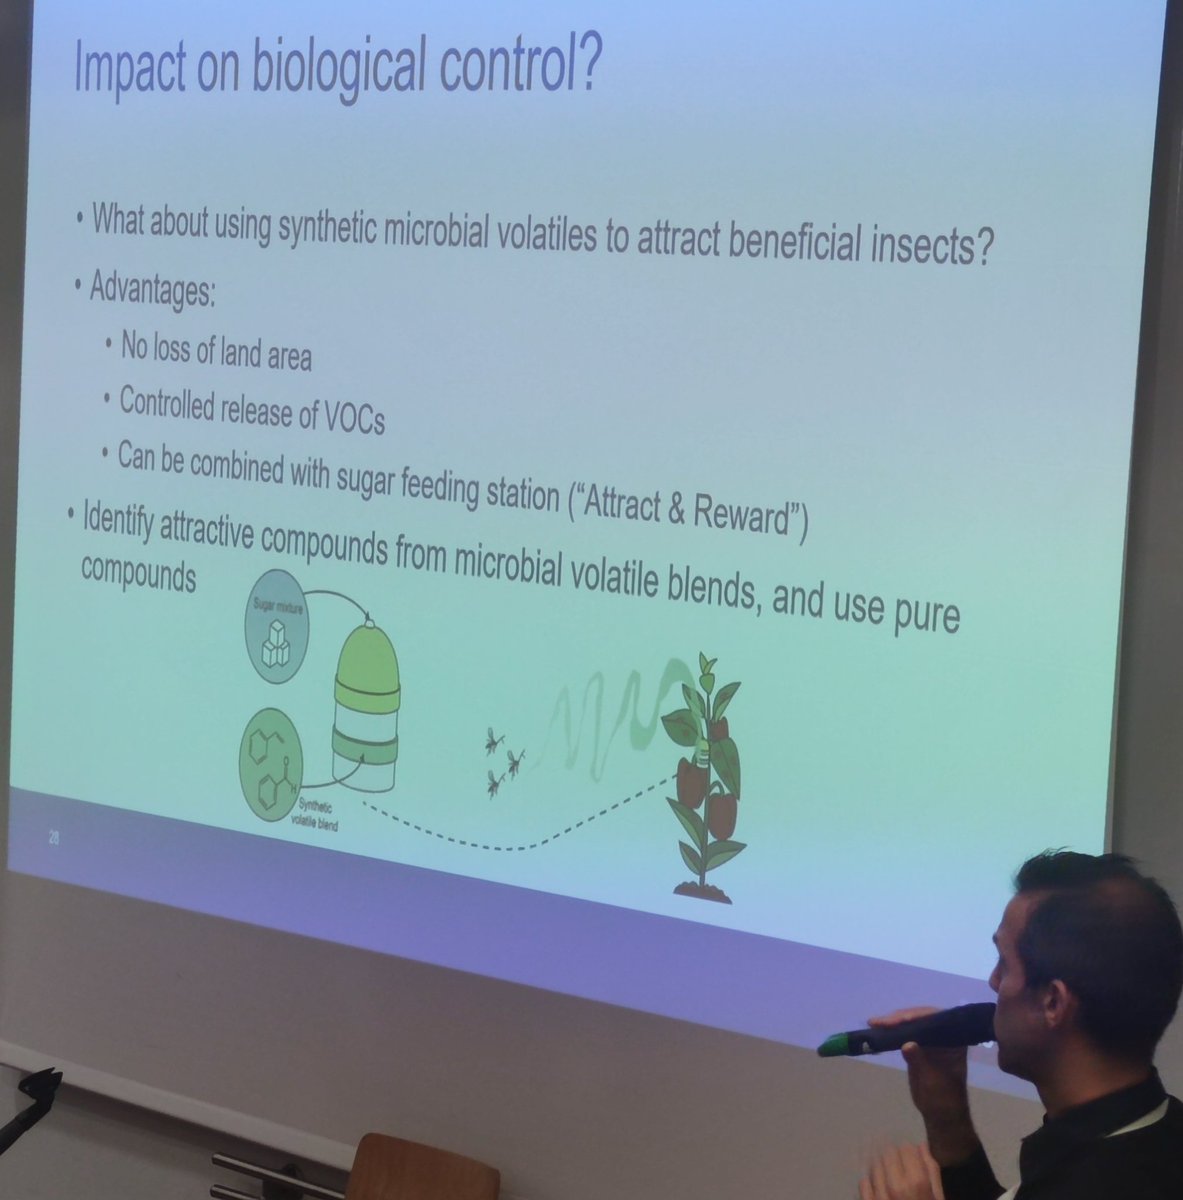 The 2nd day of #CNIE 2023 opened with presentation by @bartlievens1 : 
👉Nectar-inhabiting #microbes: hidden players in plant-insect interactions, important impact on #pollinators and #parasitoids 
🐝🦋🌸🦠

Promising results for the future of #biocontrol against insect pests